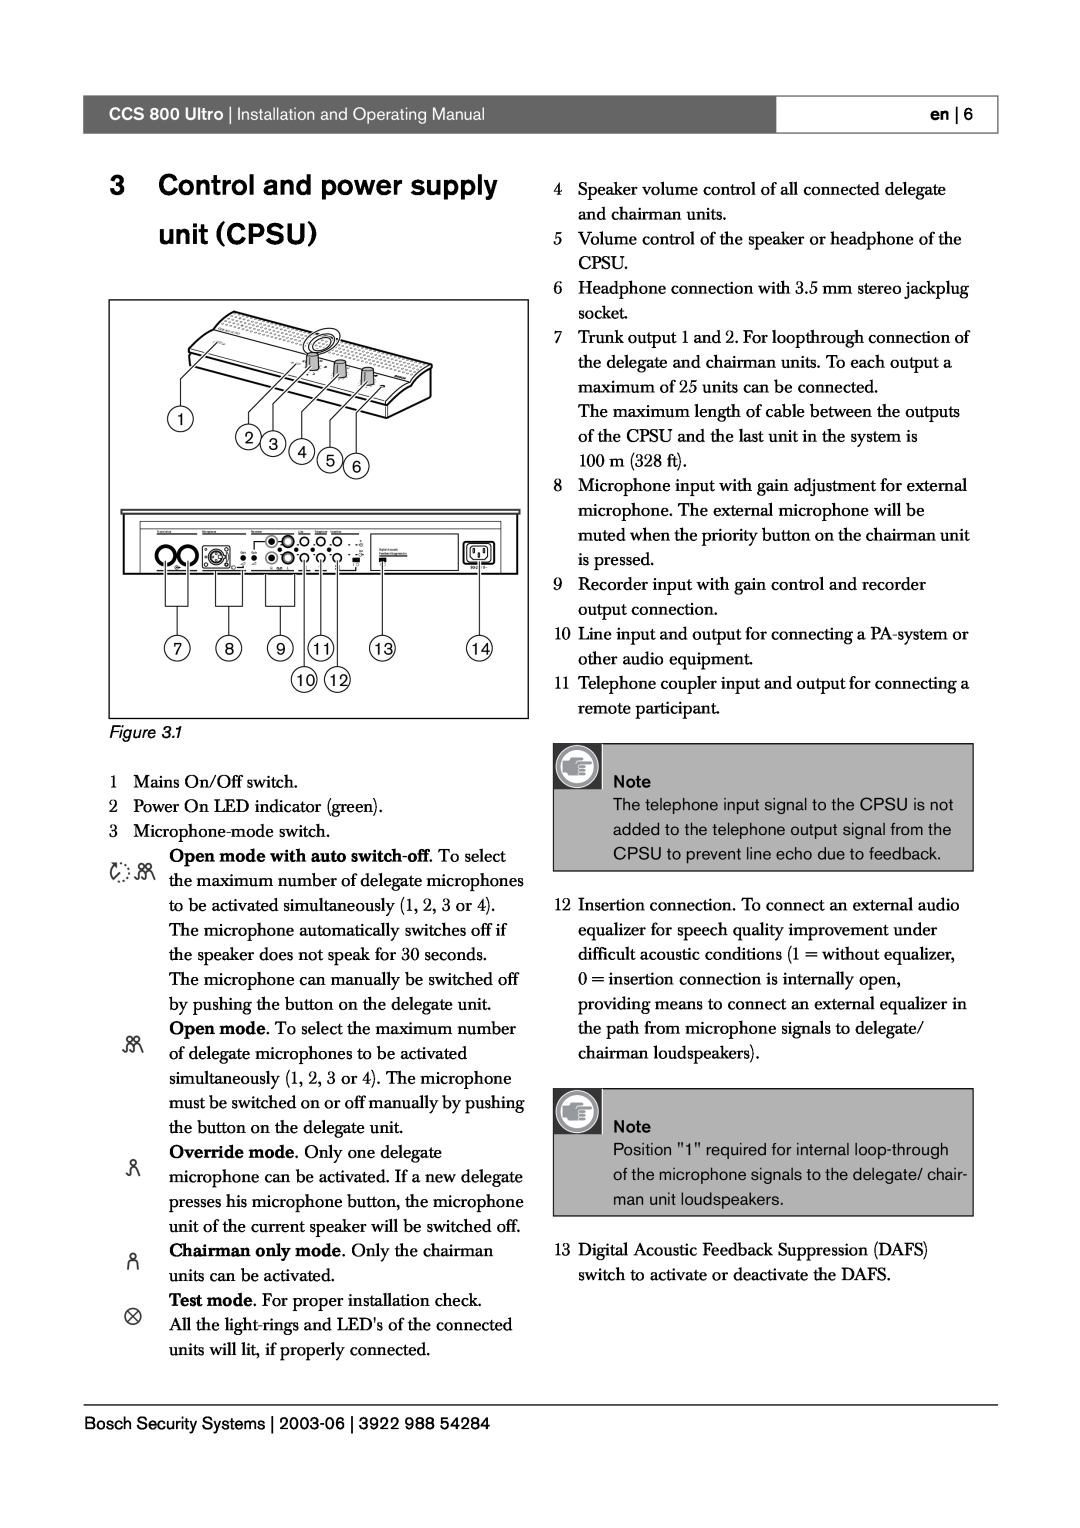 Bosch Appliances manual 3Control and power supply unit CPSU, CCS 800 Ultro Installation and Operating Manual 